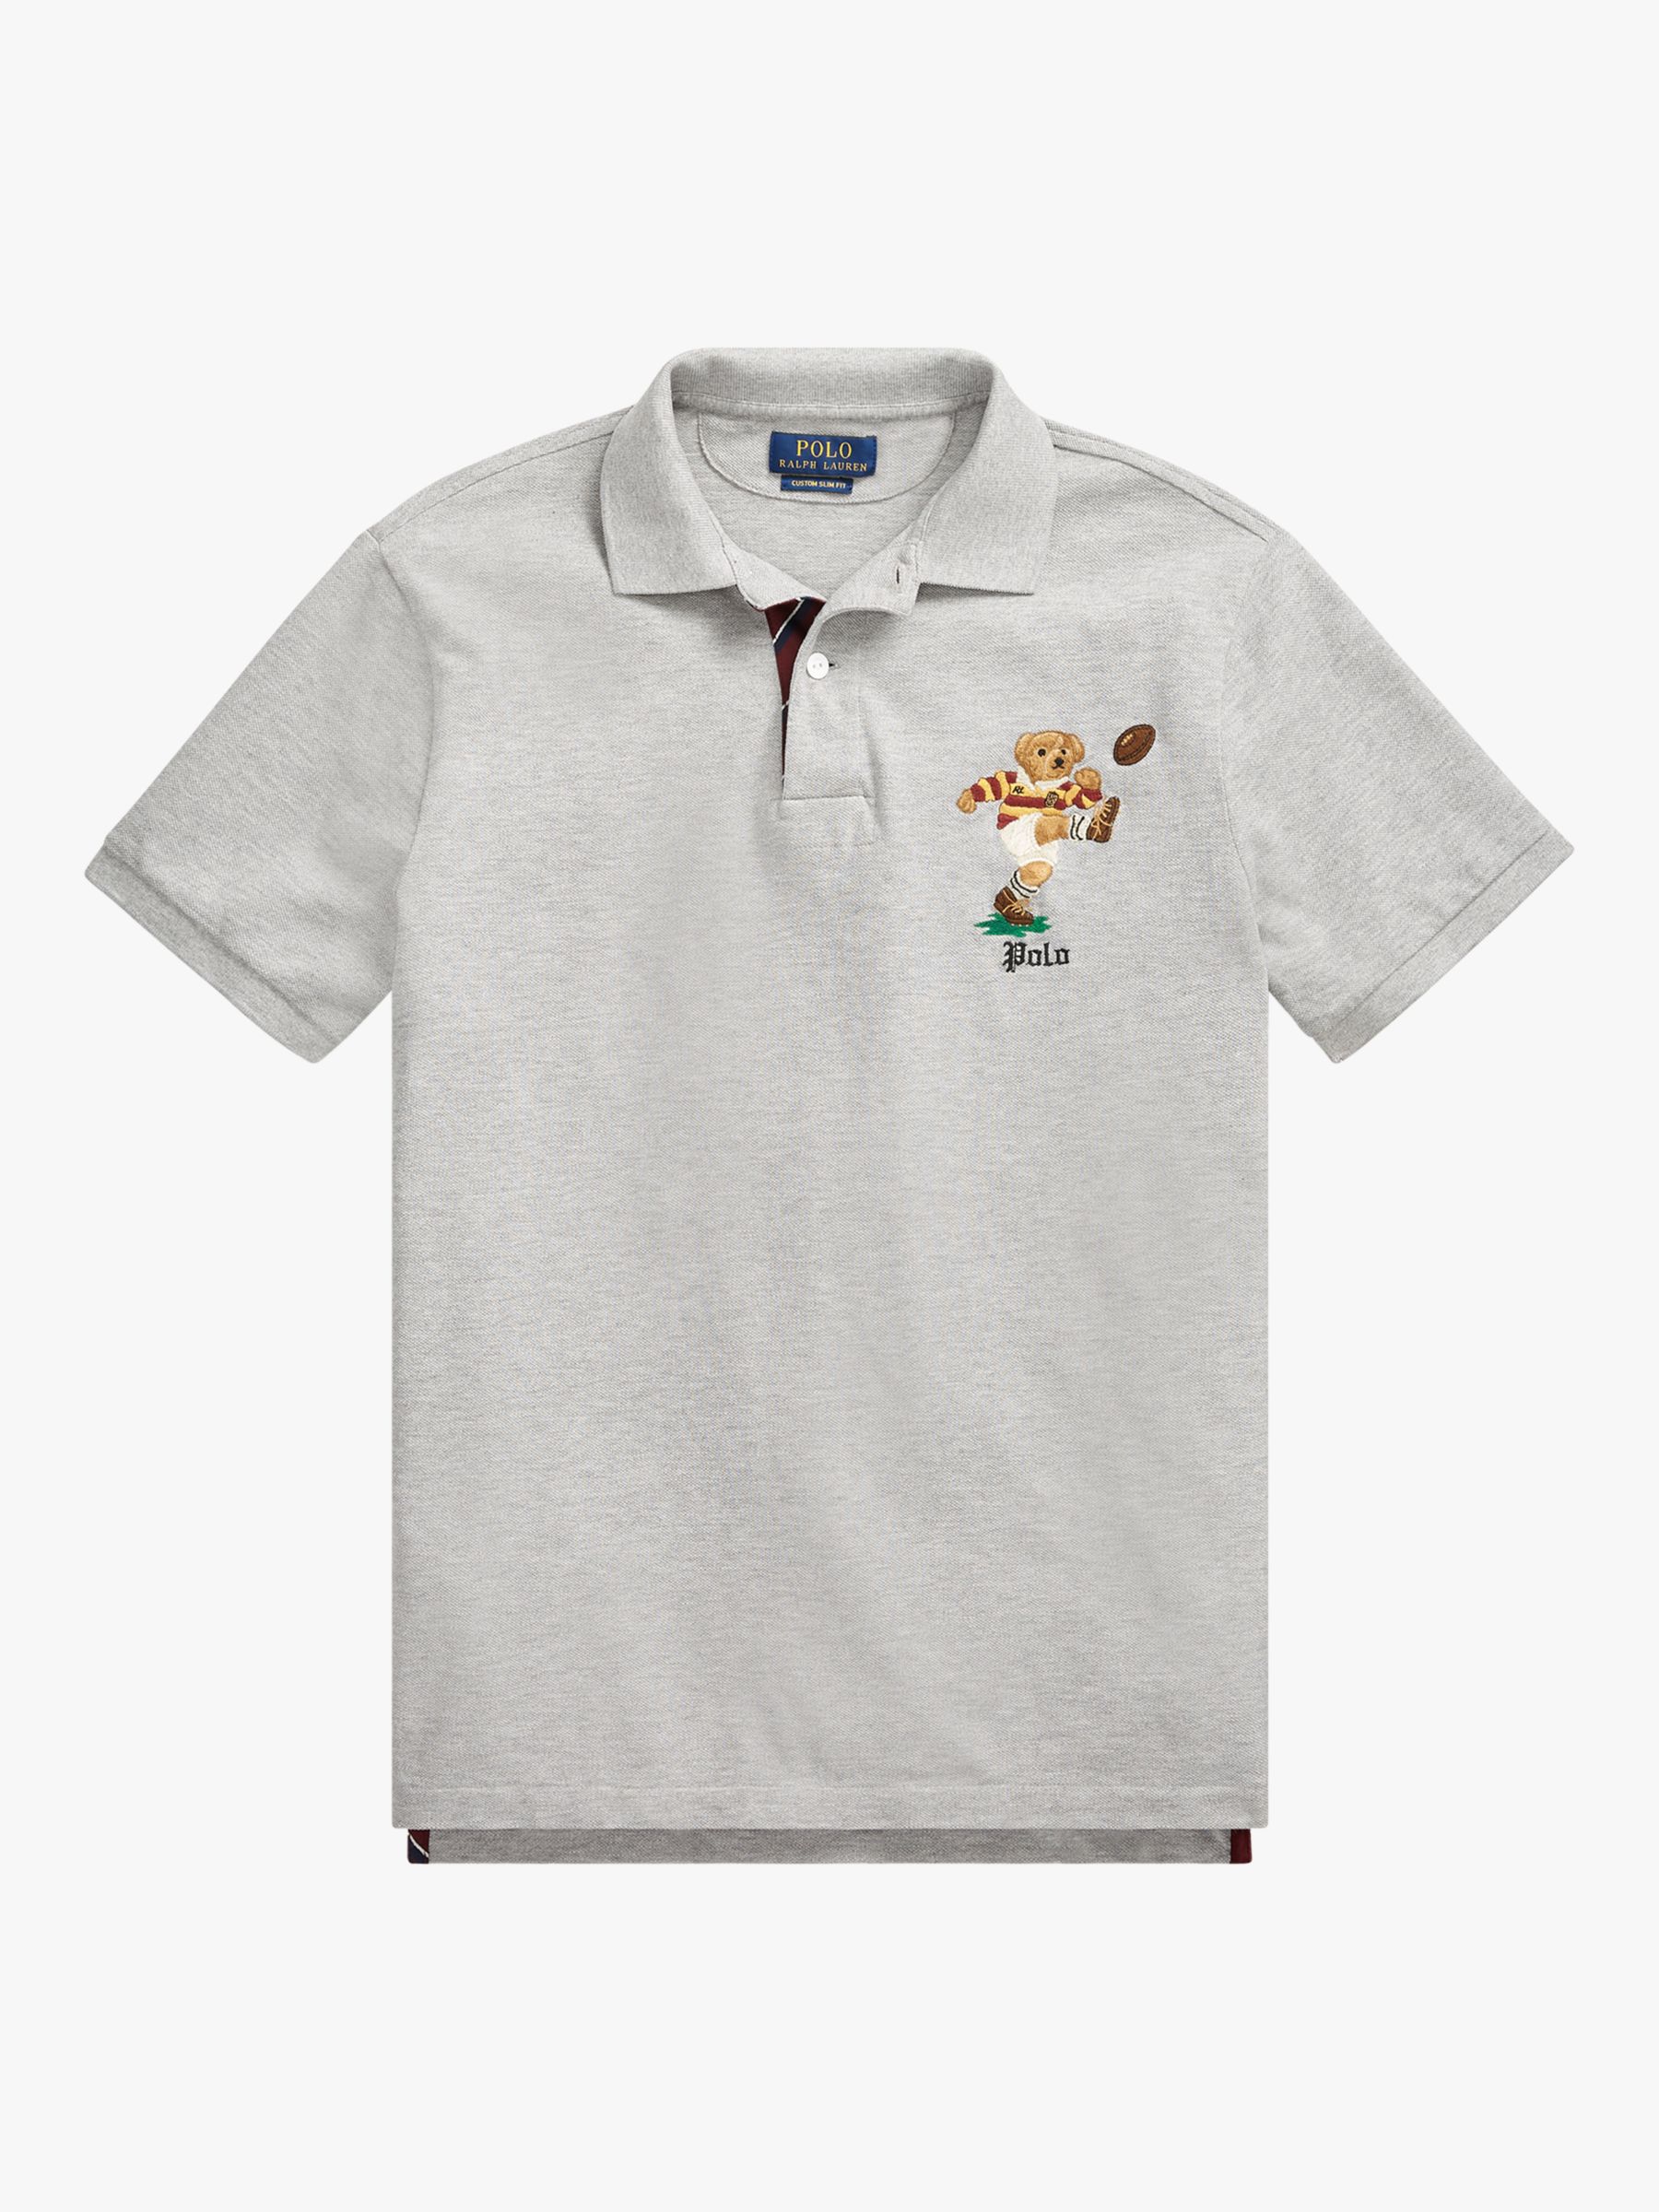 matching ralph lauren polo shirts for family